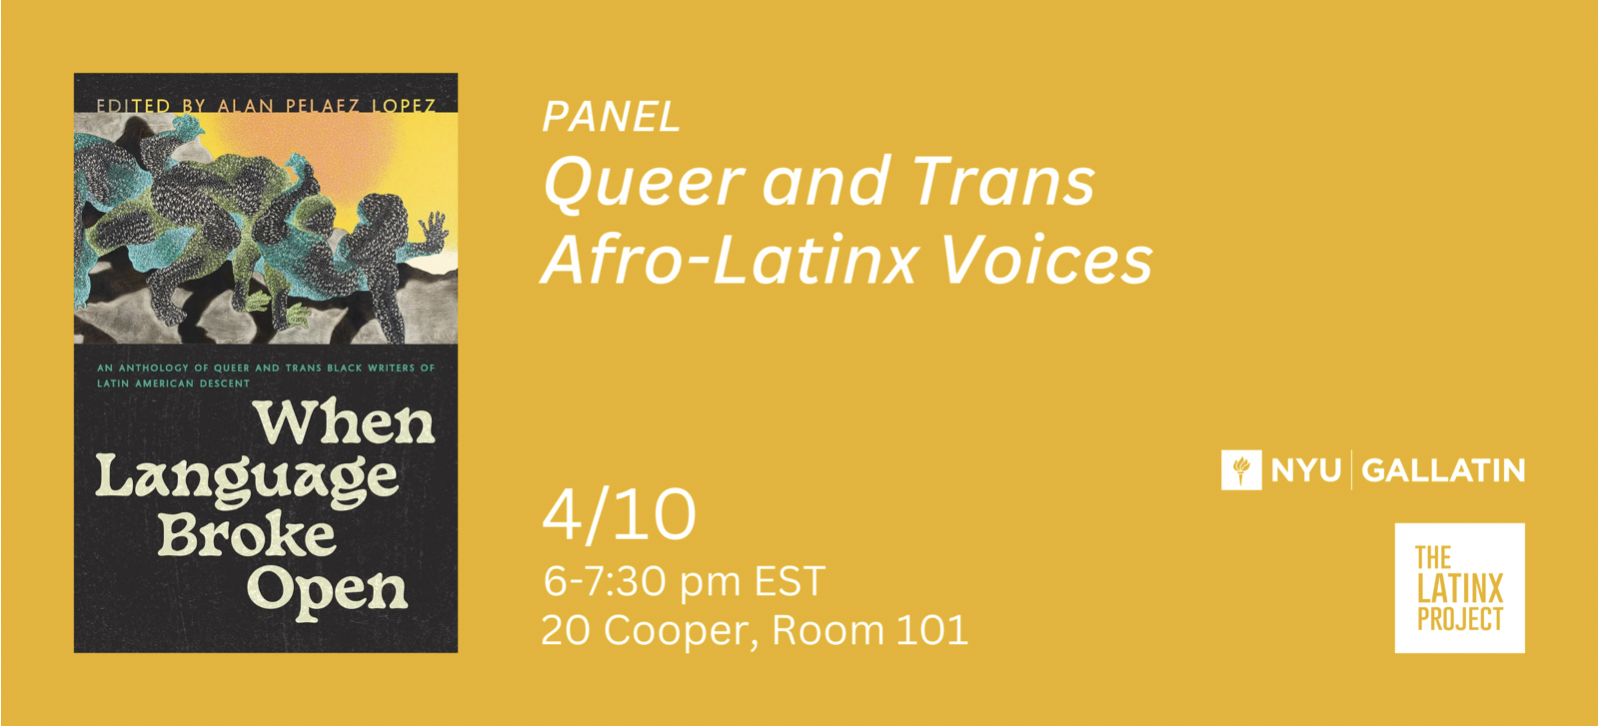 NYU Latinx Project poster for a panel discussion titled Queer and Trans Afro-Latinx Voices, to be held on April 10th